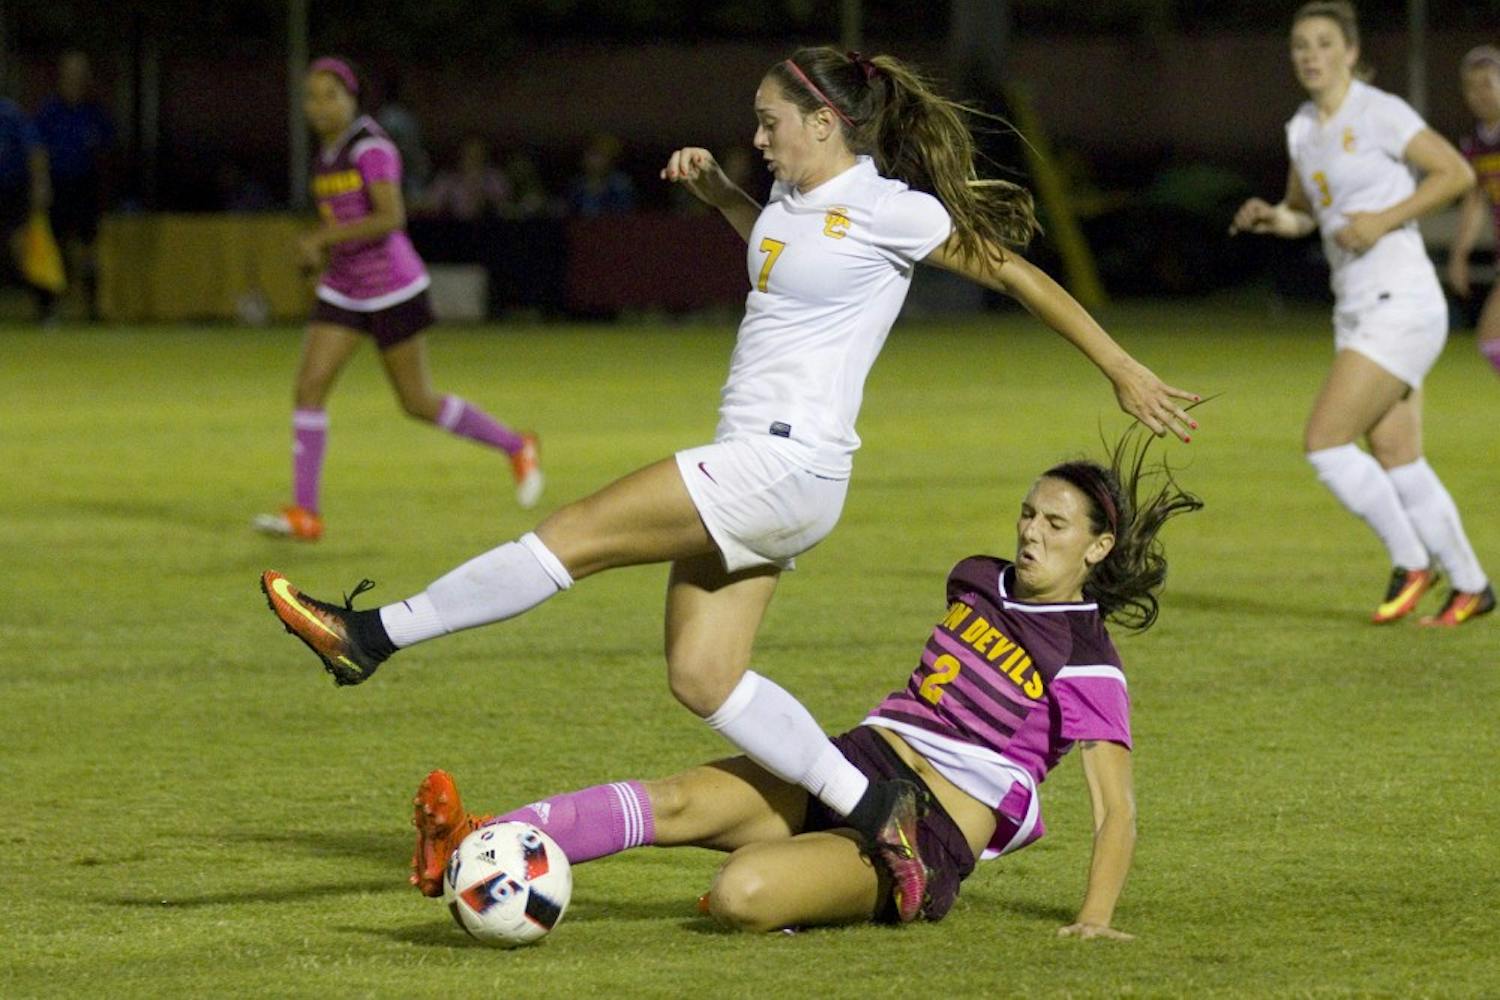 ASU freshman forward Christina Edwards (2) executes a slide tackle in the second half of a 2-0 loss to the USC Trojans in Sun Devil Soccer Stadium in Tempe, Arizona, on Saturday, Oct. 15, 2016. The team wore pink uniforms for their annual game dedicated to Breast Cancer Awareness. 